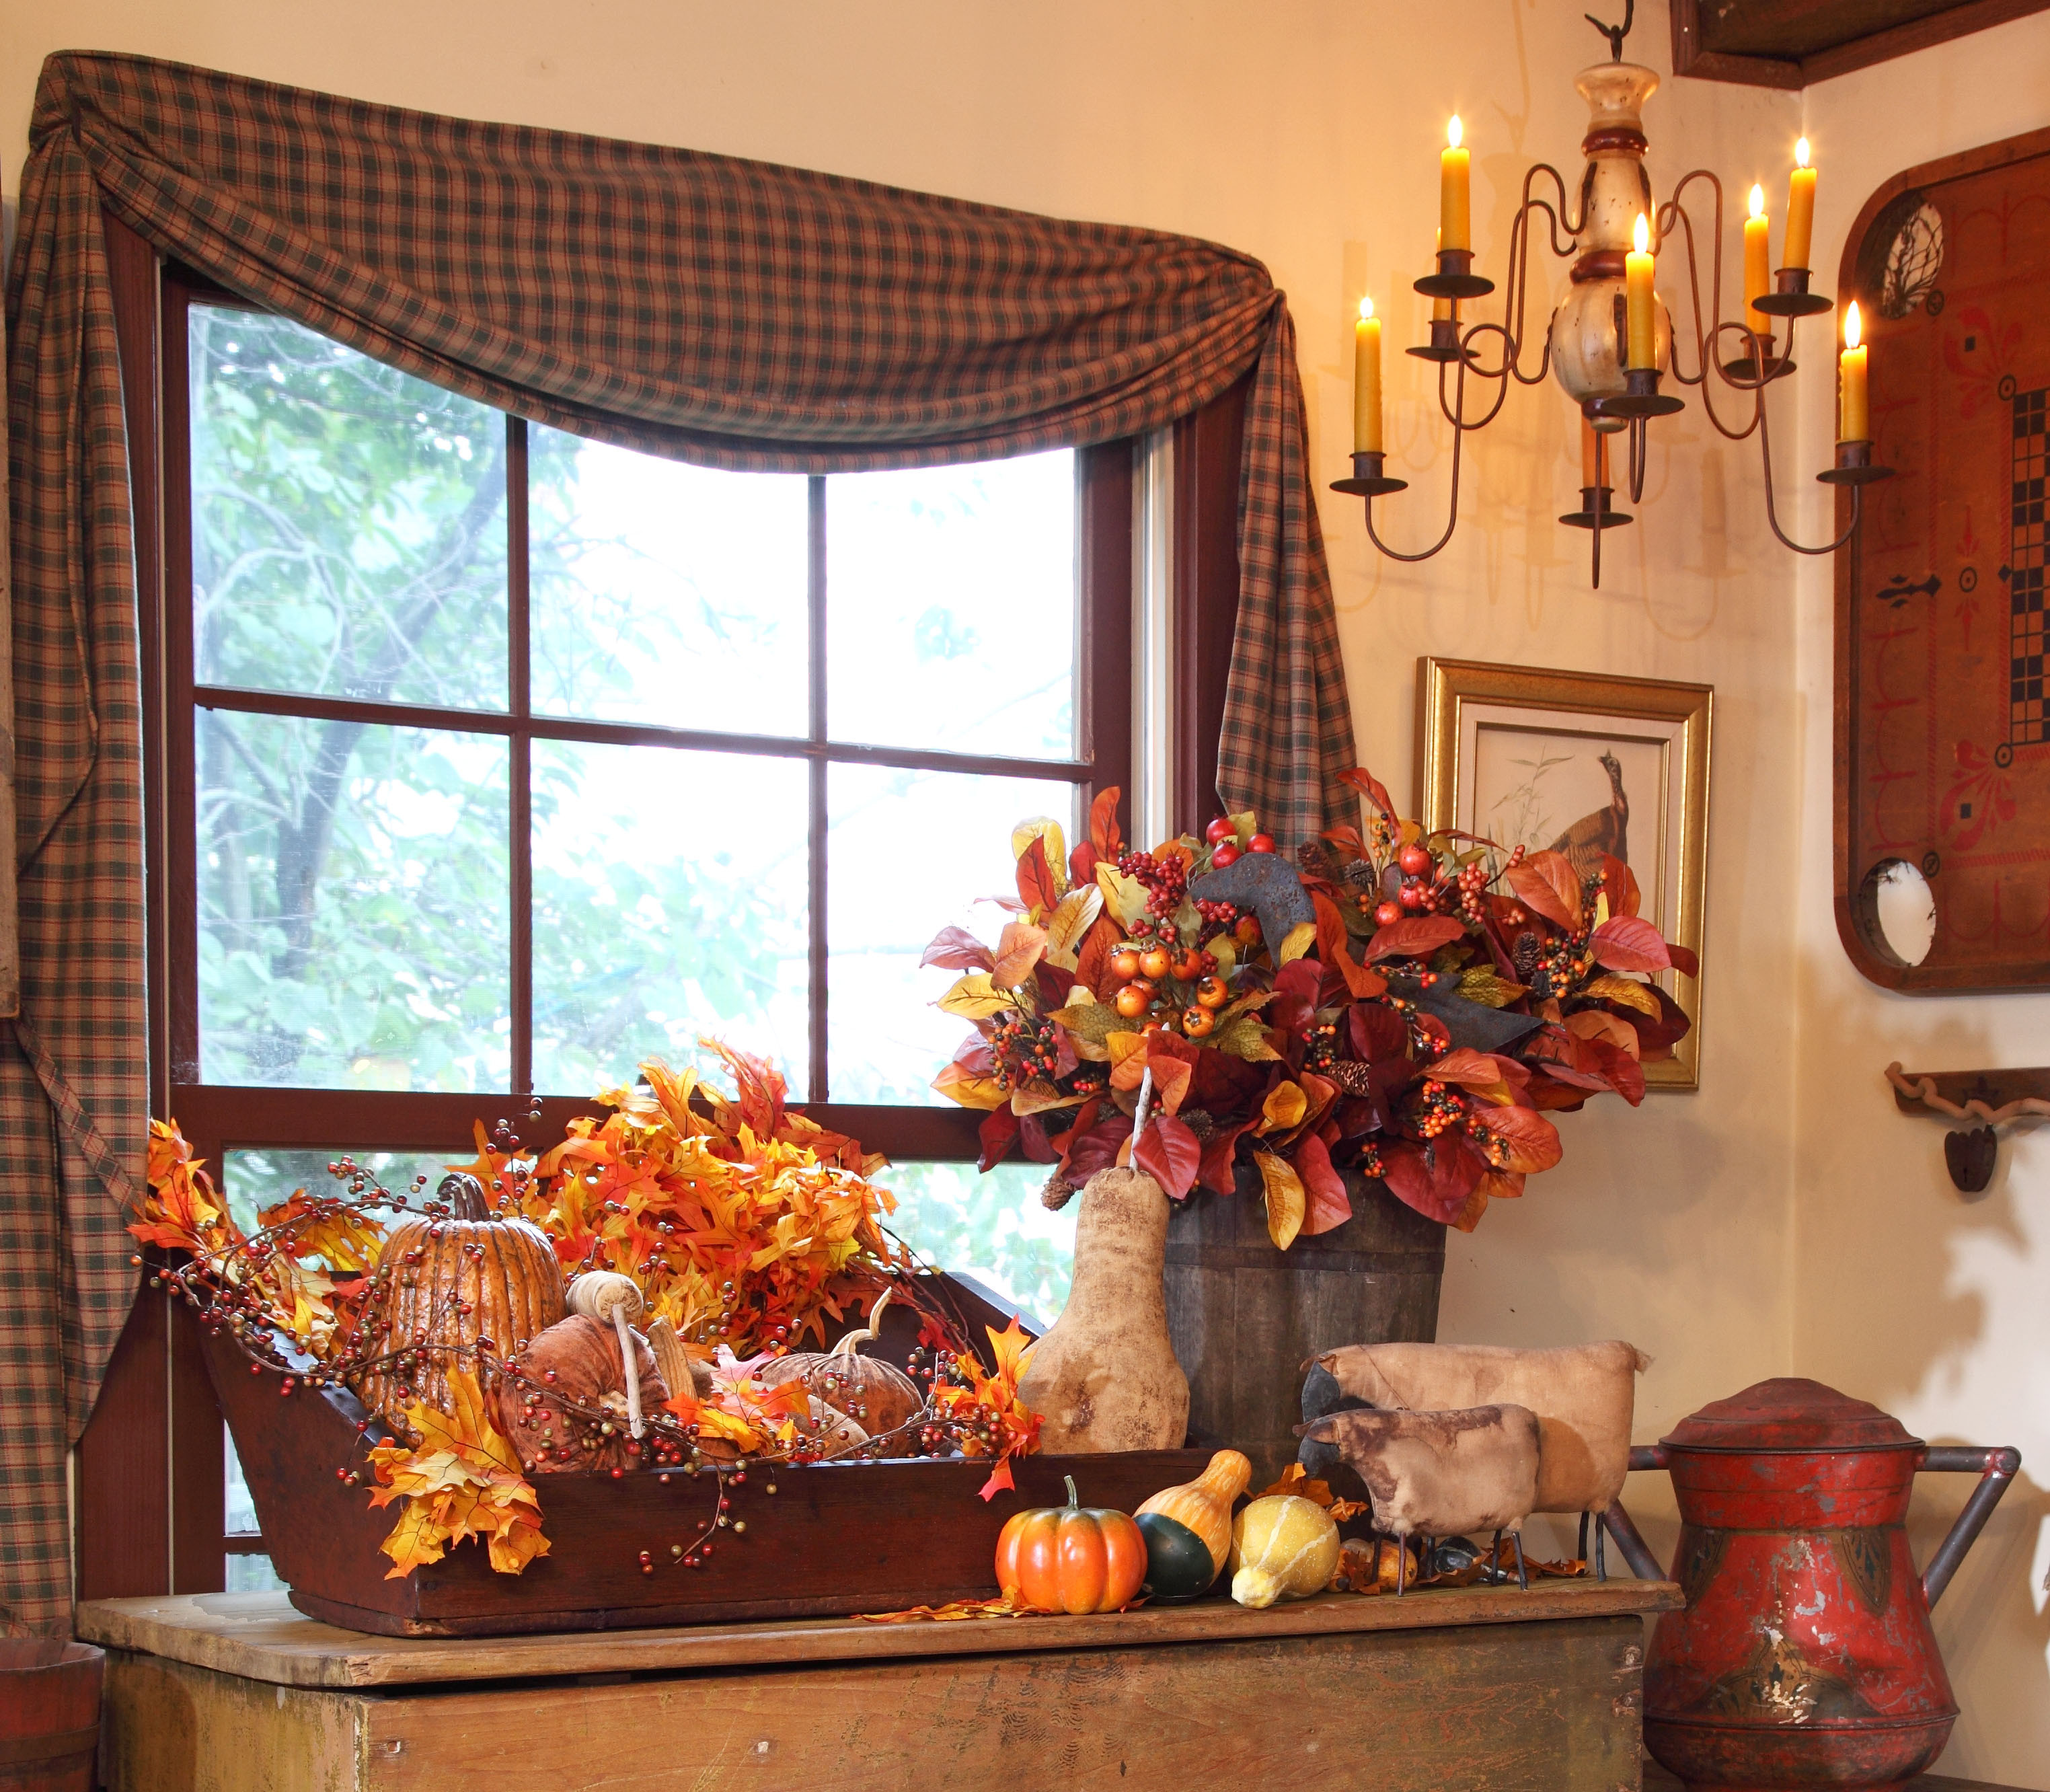 At Home Fall Decor
 3 Quick Fall Decorating Tips